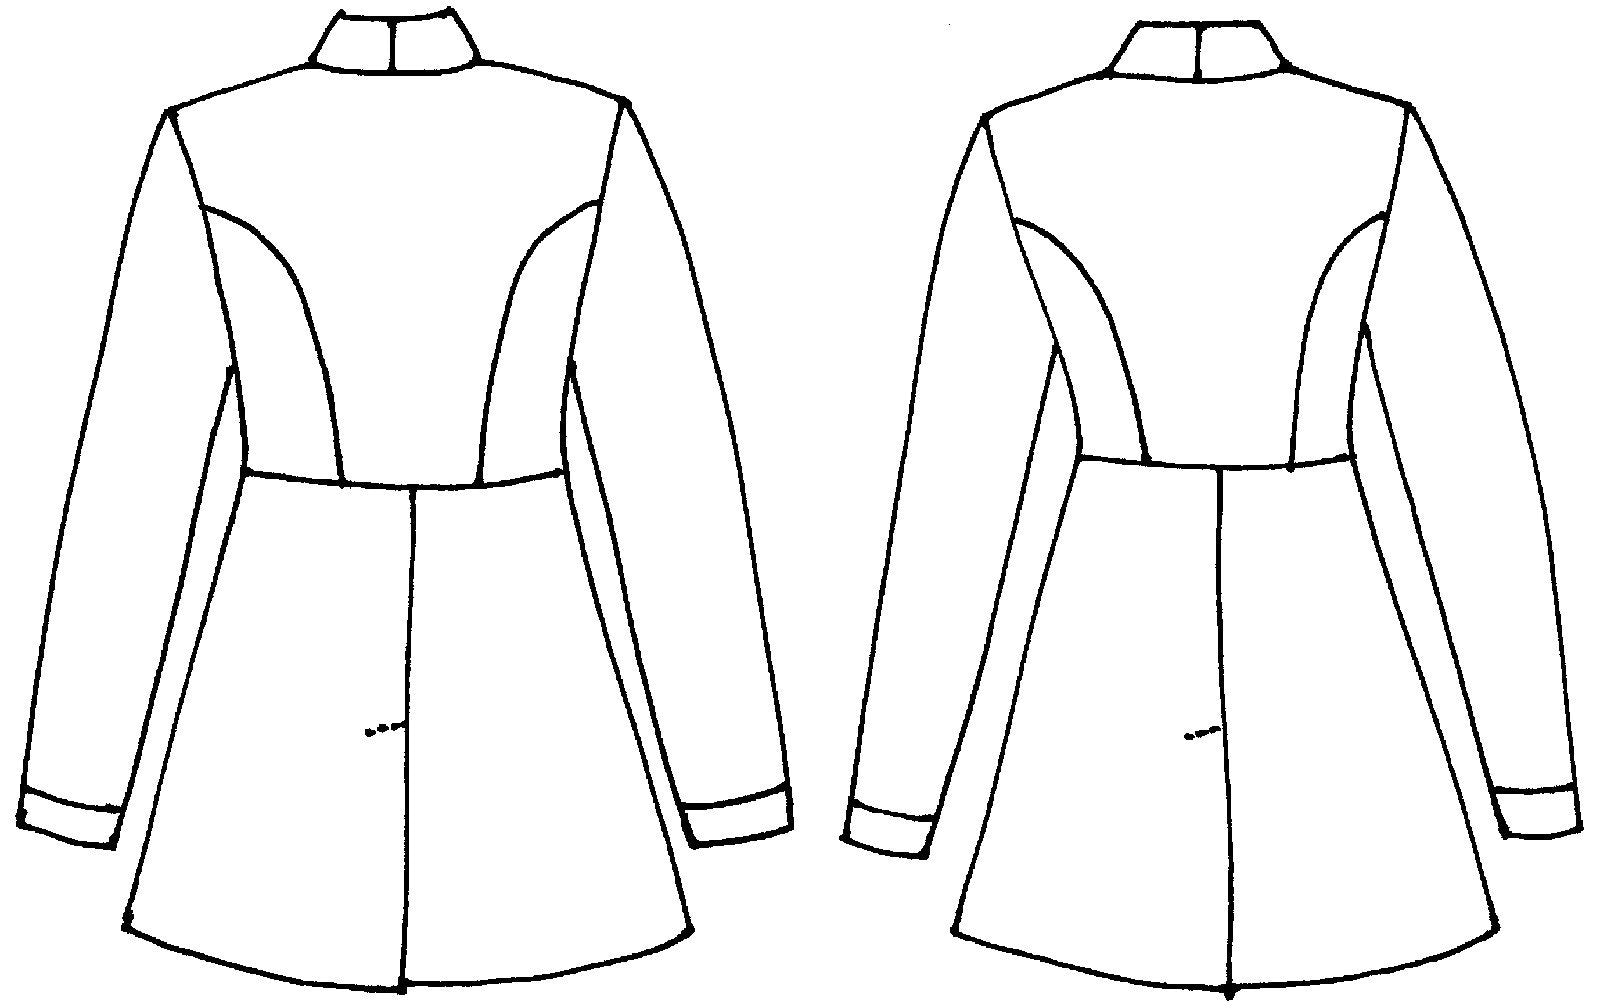 Black and white Pattern drawing of the back view of the man and woman's Countryside Frock Coat.